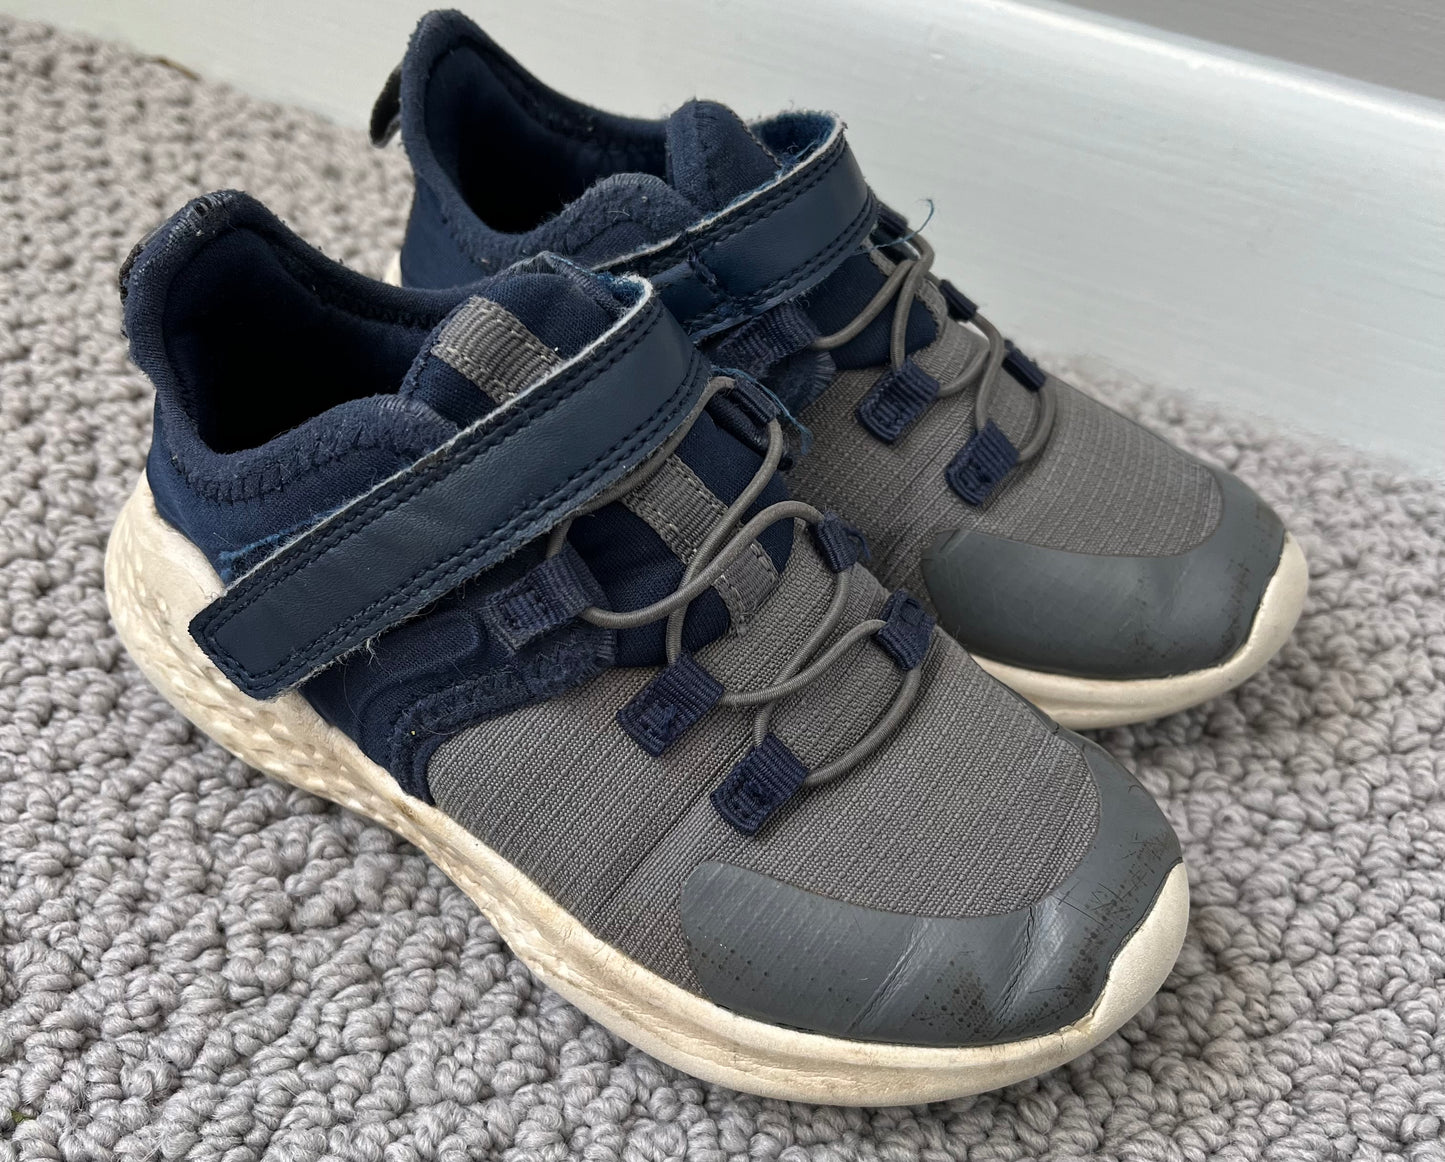 Boys size 10 navy gym shoes (45244)